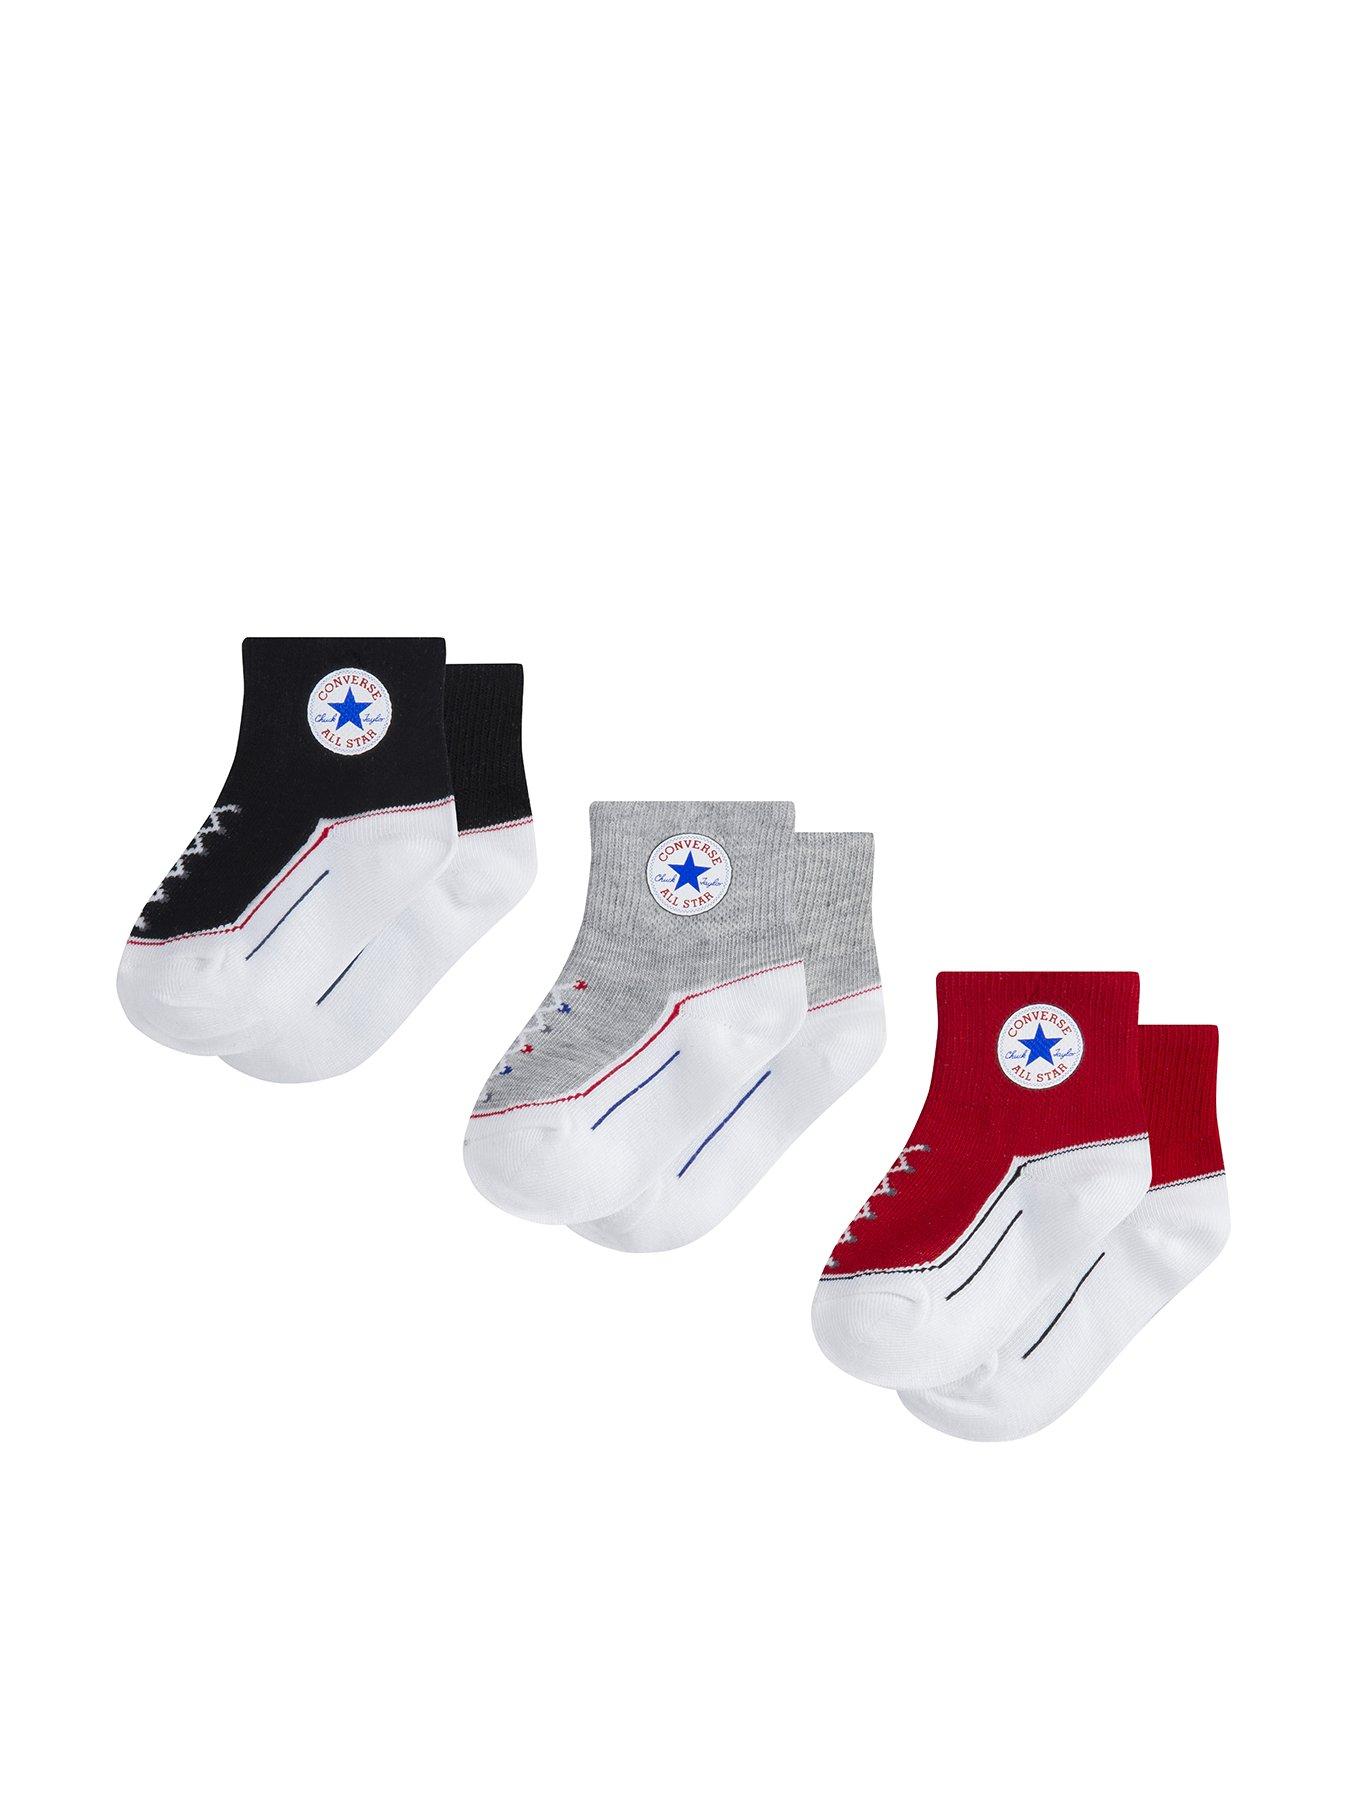 Details about   6 pairs white tennis socks fits 10-13 NIP cotton/polyester 